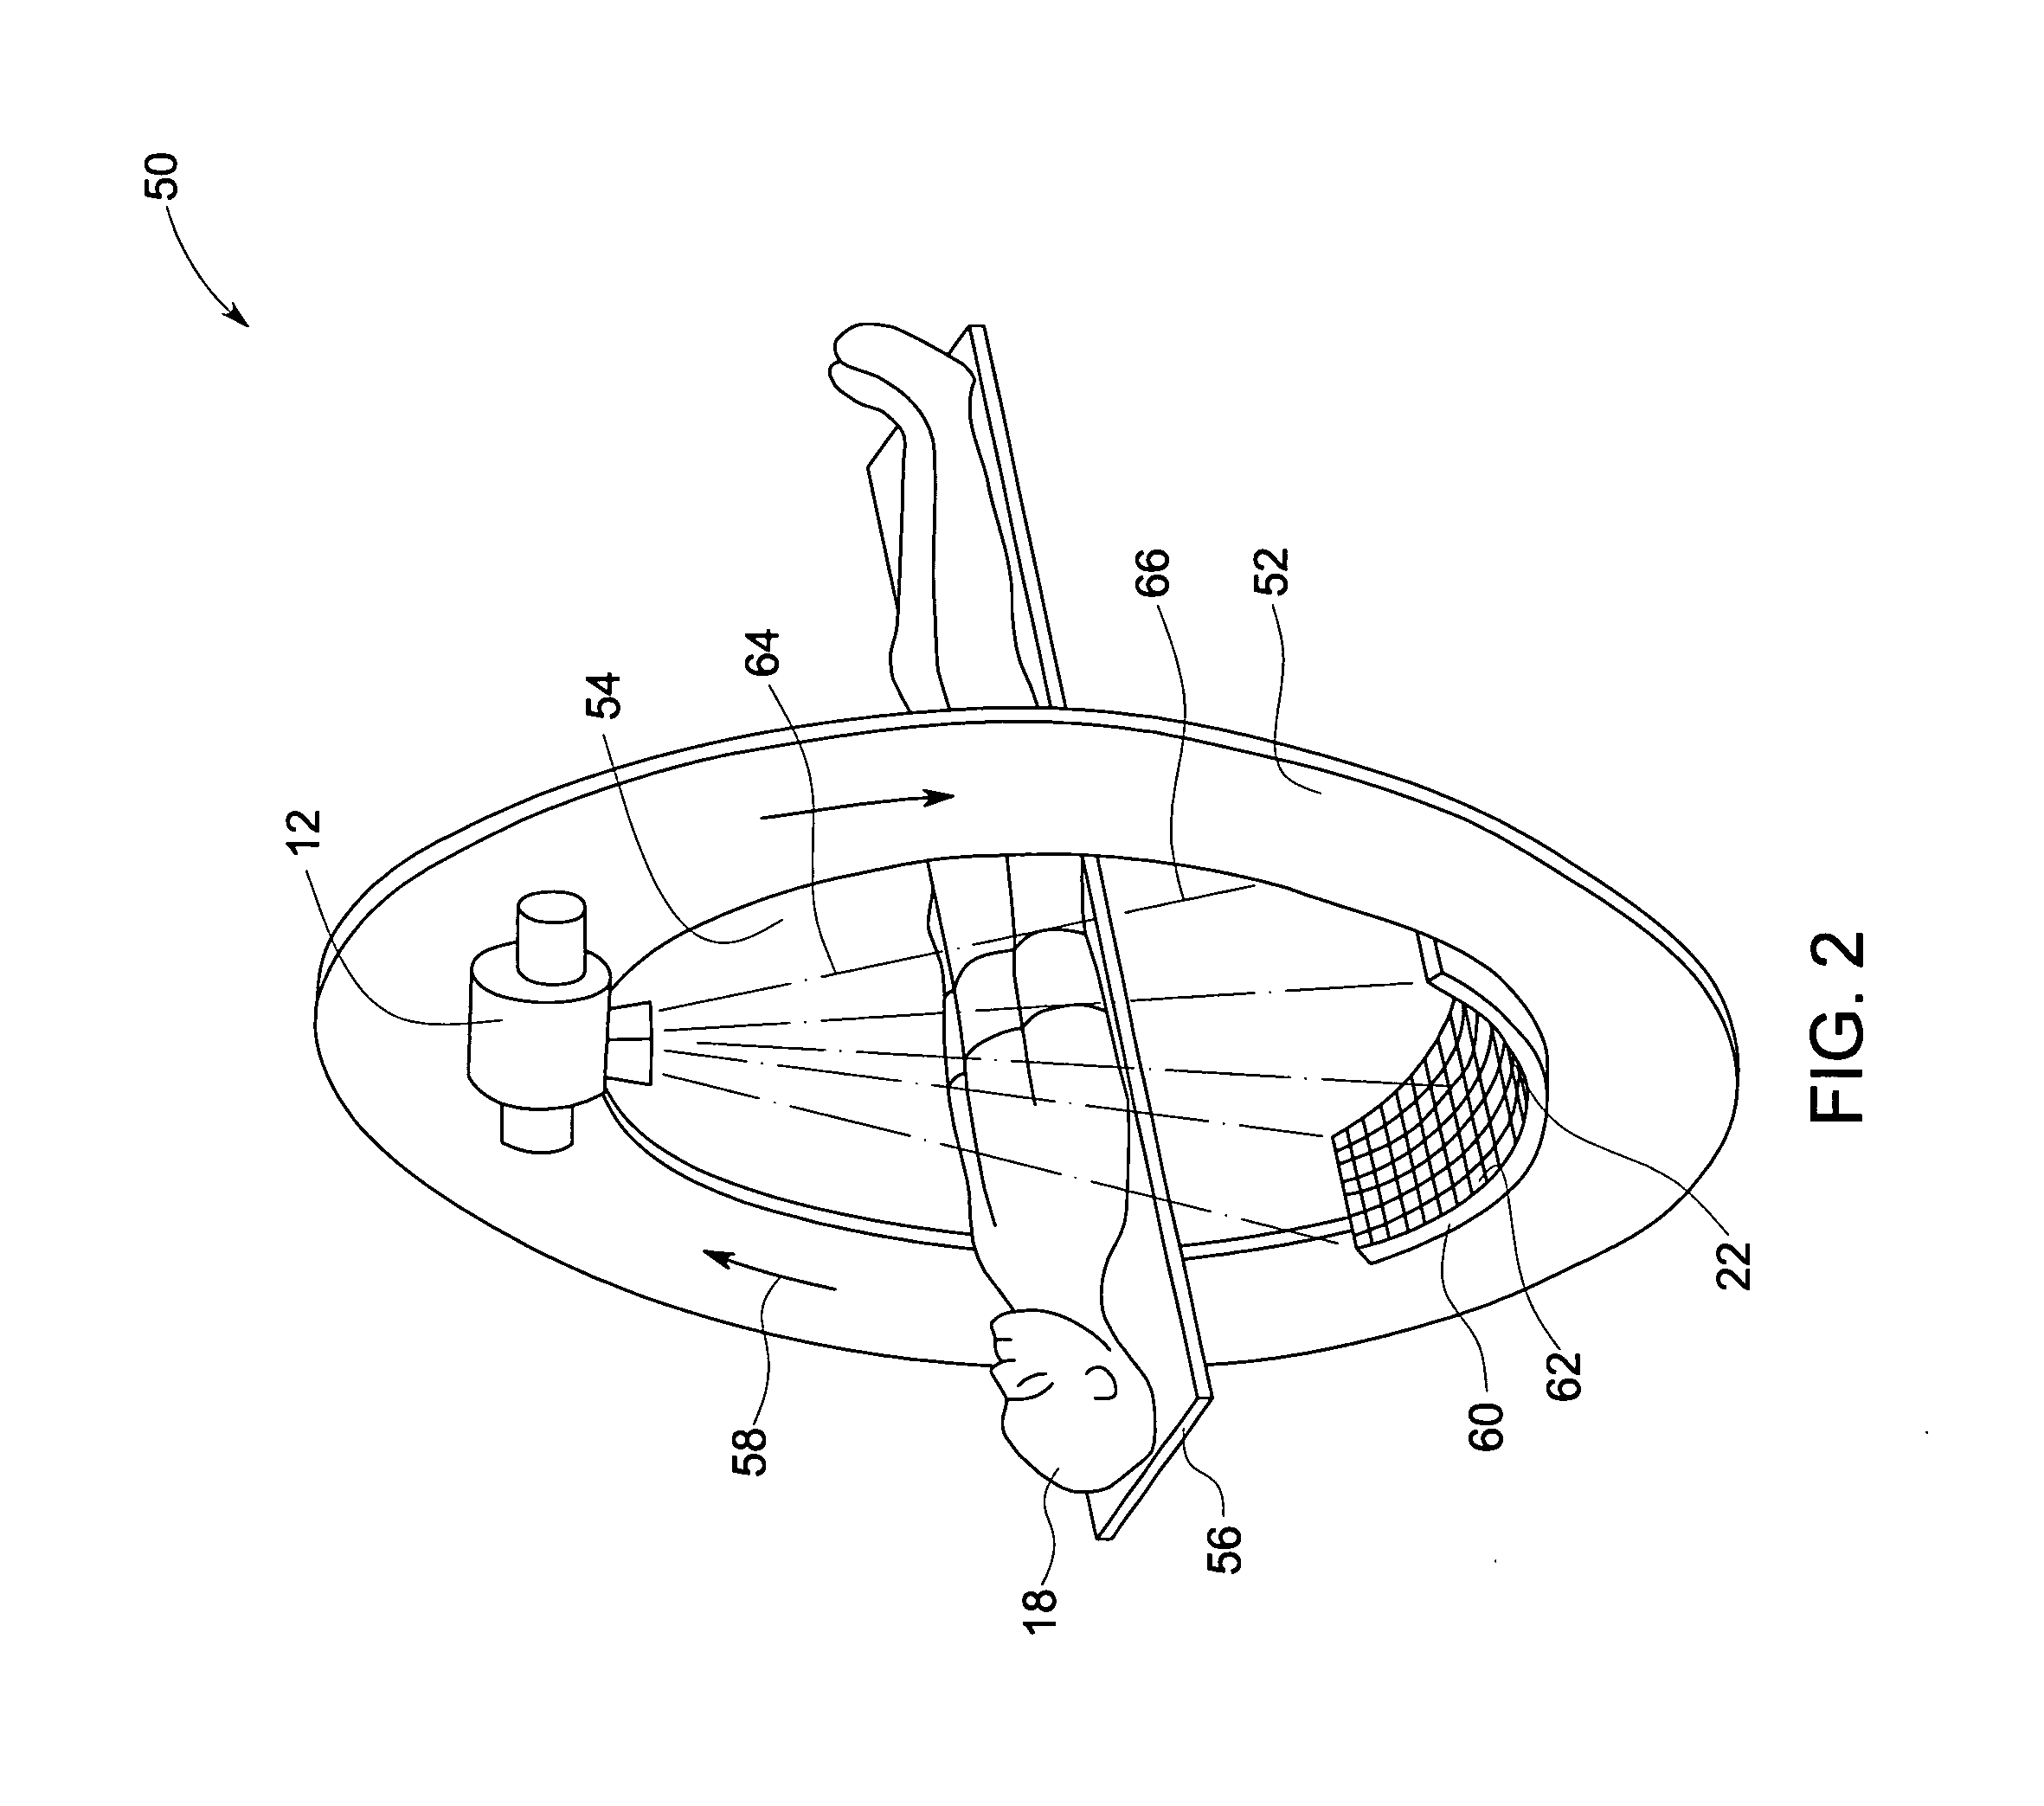 Apparatus and method for hybrid computed tomography imaging